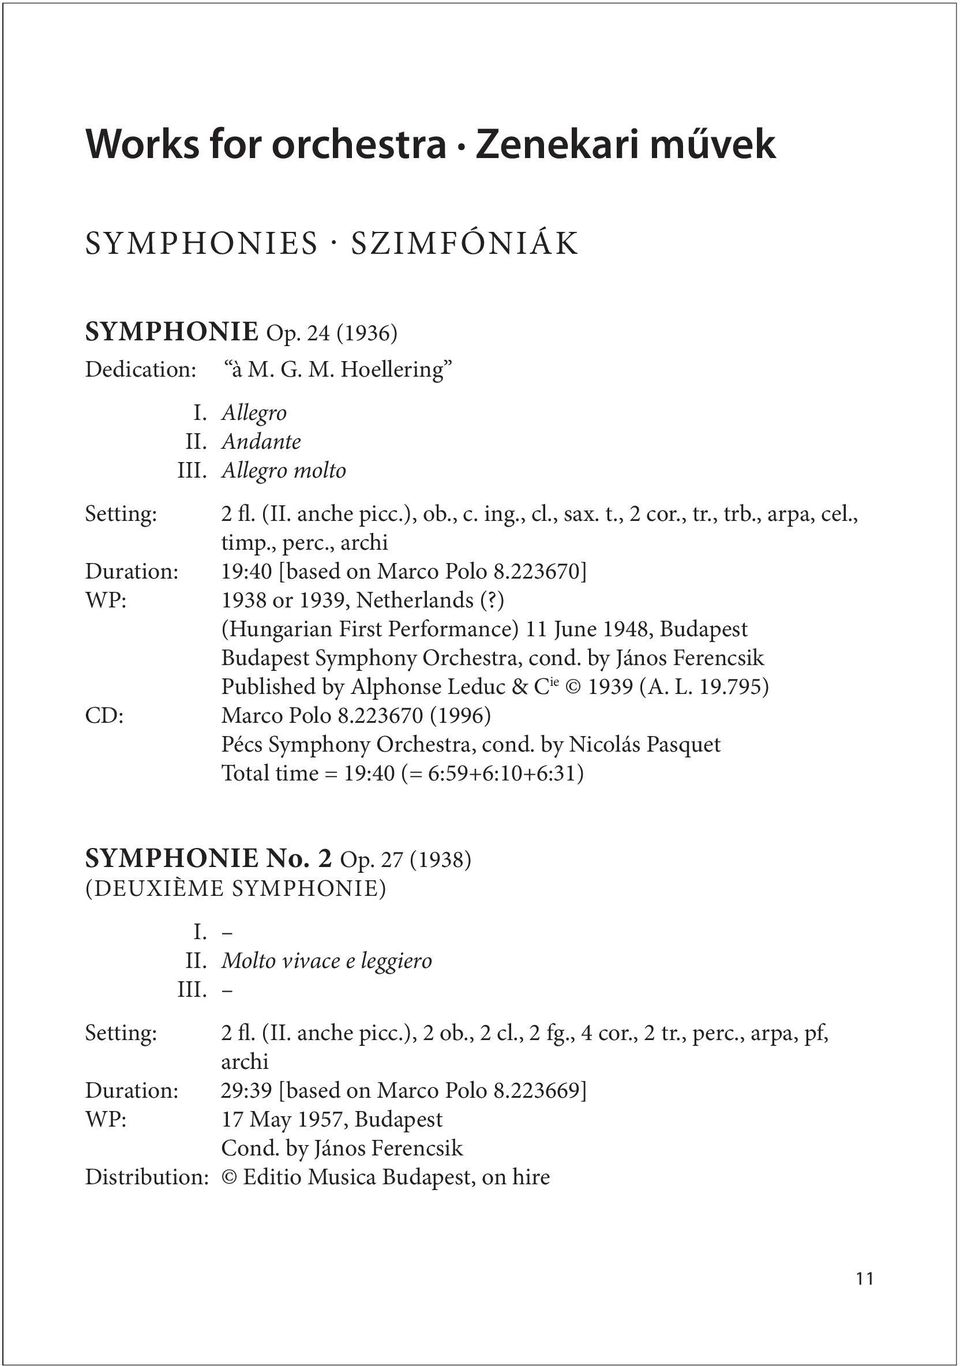 ) (Hungarian First Performance) 11 June 1948, Budapest Budapest Symphony Orchestra, cond. by János Ferencsik Published by Alphonse Leduc & C ie 1939 (A. L. 19.795) CD: Marco Polo 8.